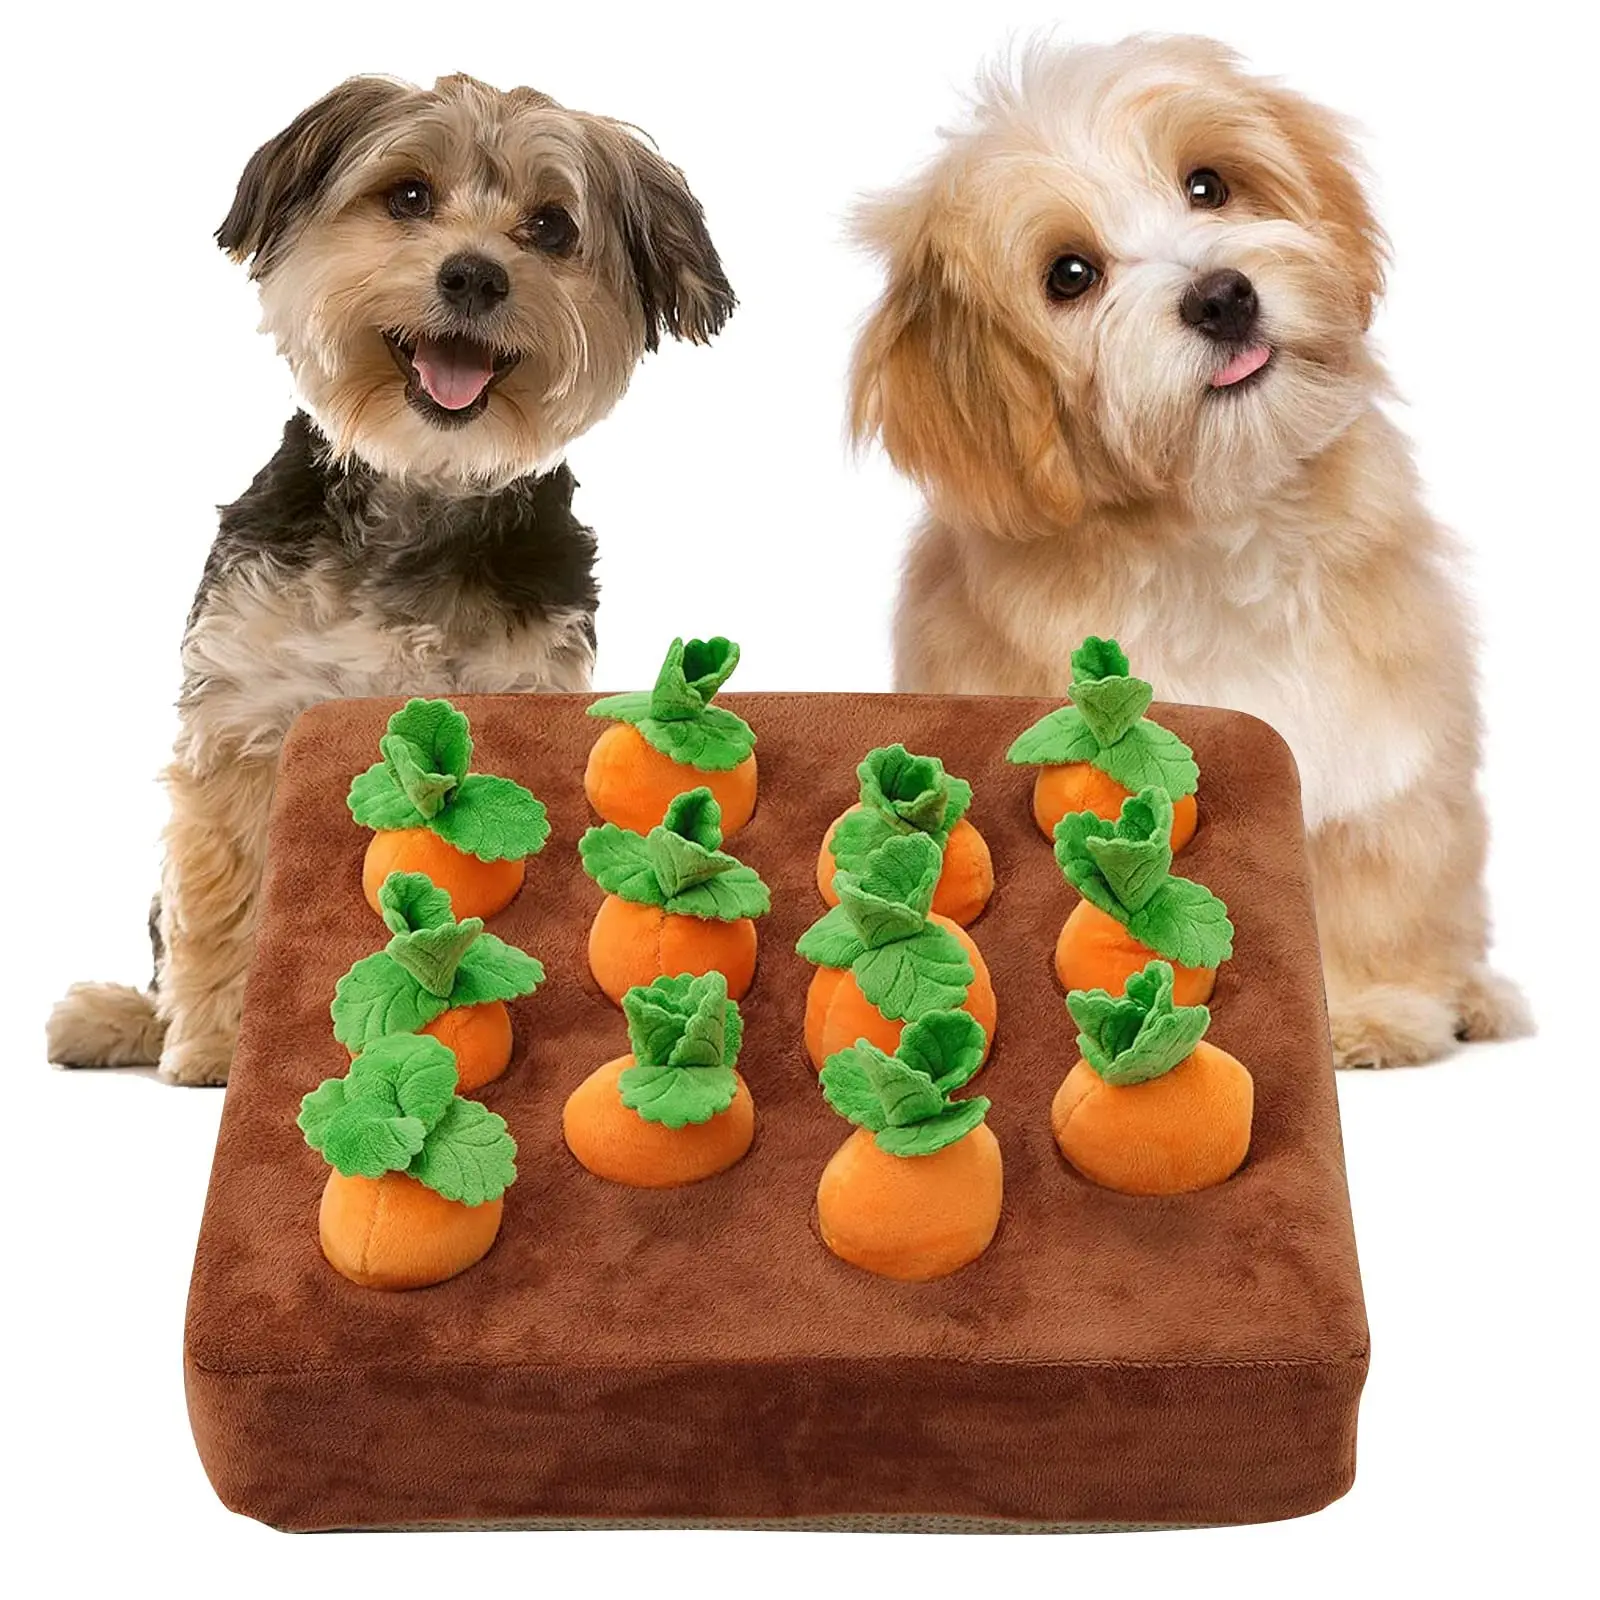 

Interactive Dog Toy Squeaky Carrots Enrichment Puzzle Toys, Hide and Seek, Carrot Farm, Dog Chew, Carrot Patch Snuffle Patch